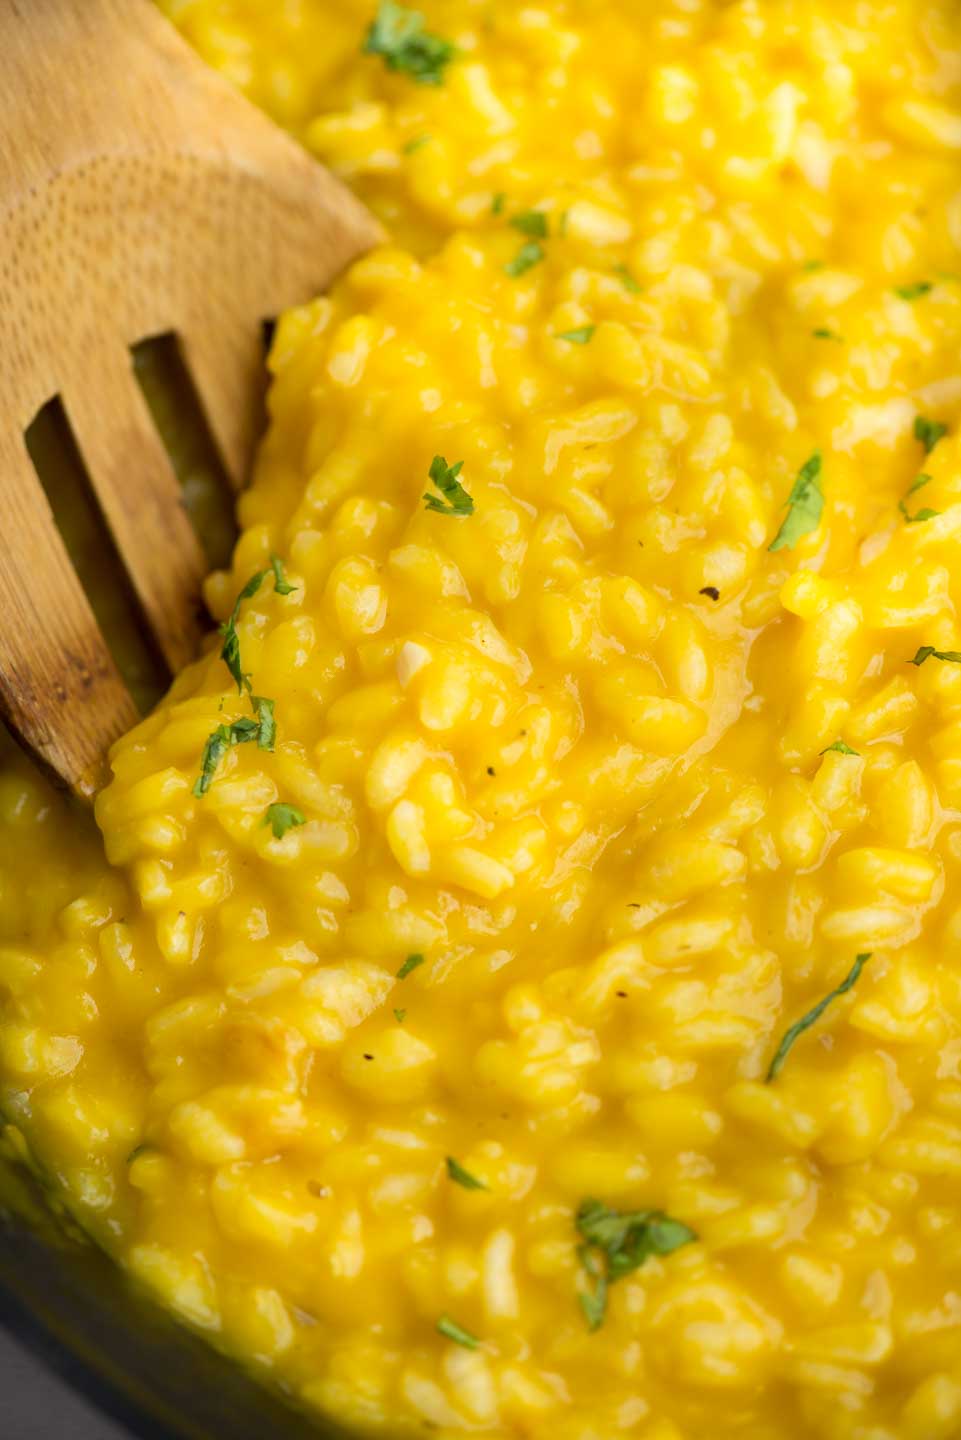 Creamy Butternut Squash Risotto, a classic Italian rice dish with arborio rice, Butternut squash puree, nutmeg, white wine and Parmesan cheese. Making restaurant-quality risotto rice at home is easy and takes only 30 minutes.